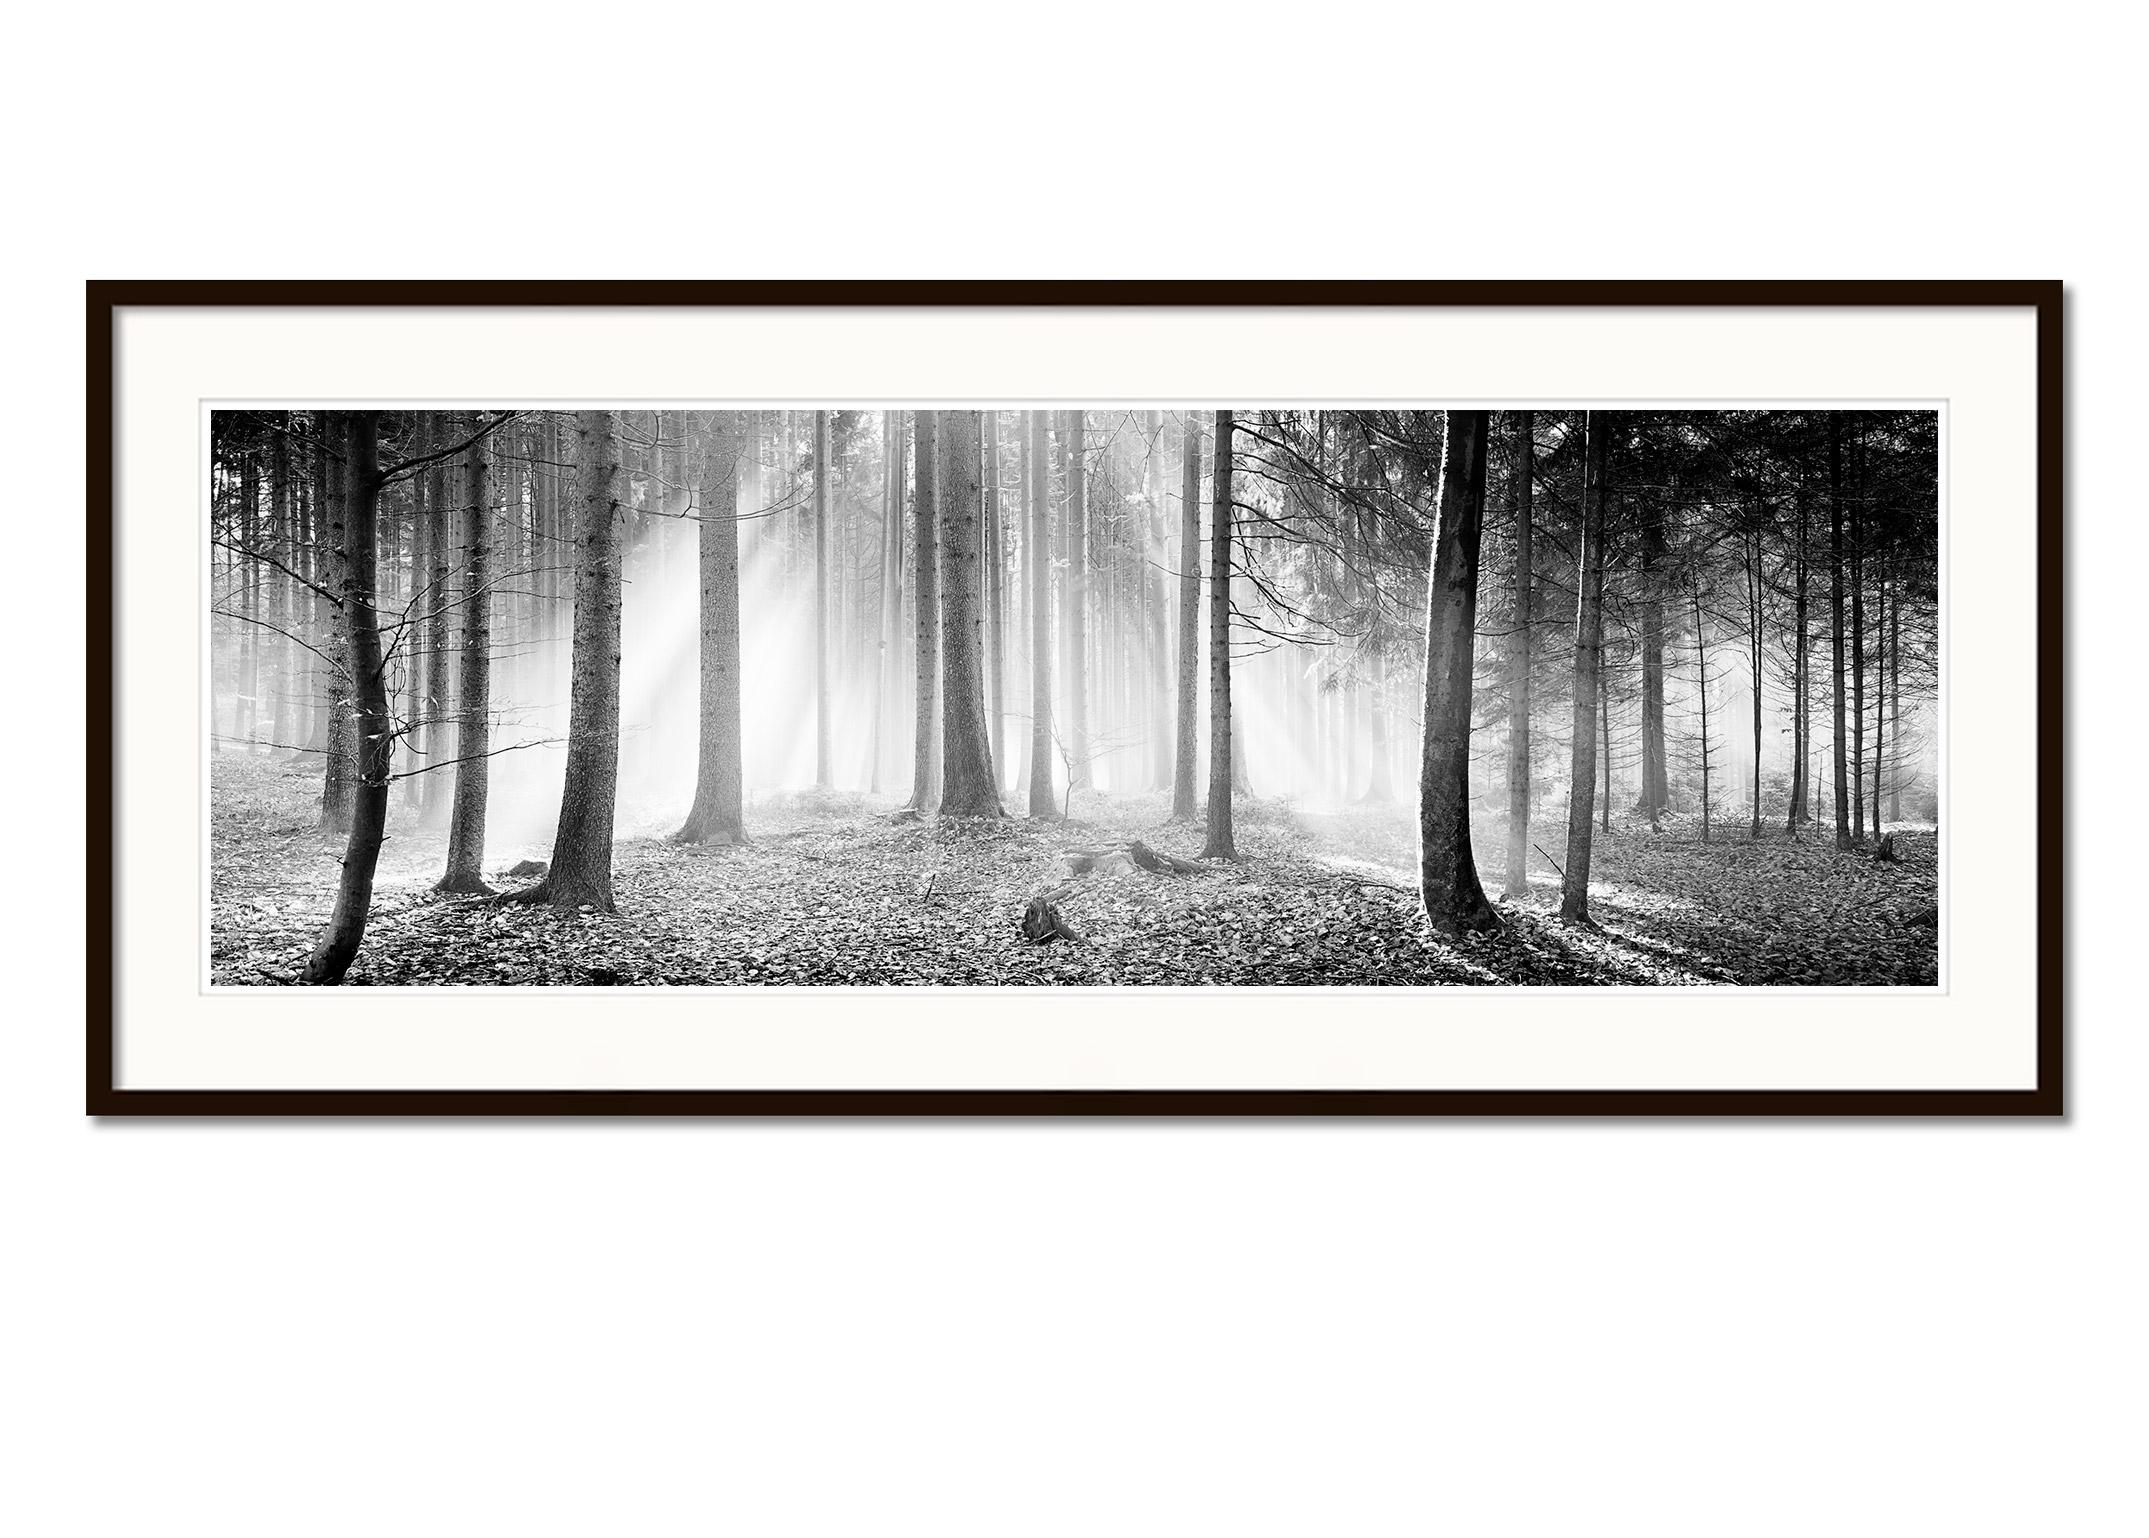 Enchanted Forest foggy sunny morning Austria black white landscape photography - Gray Black and White Photograph by Gerald Berghammer, Ina Forstinger